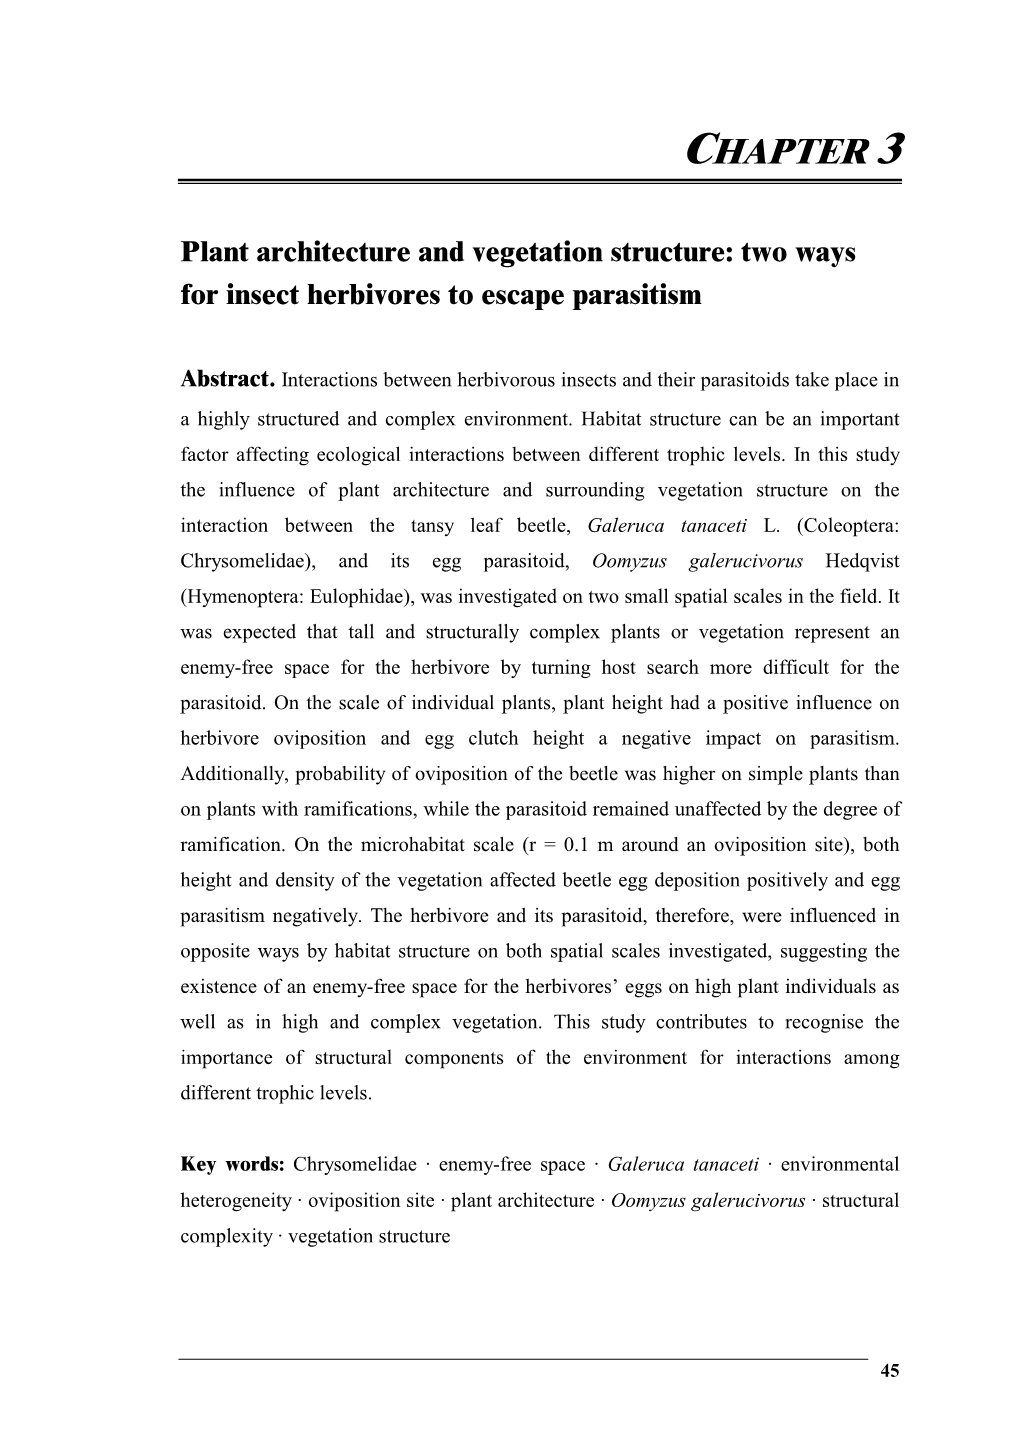 CHAPTER 3 Plant Architecture and Vegetation Structure: Two